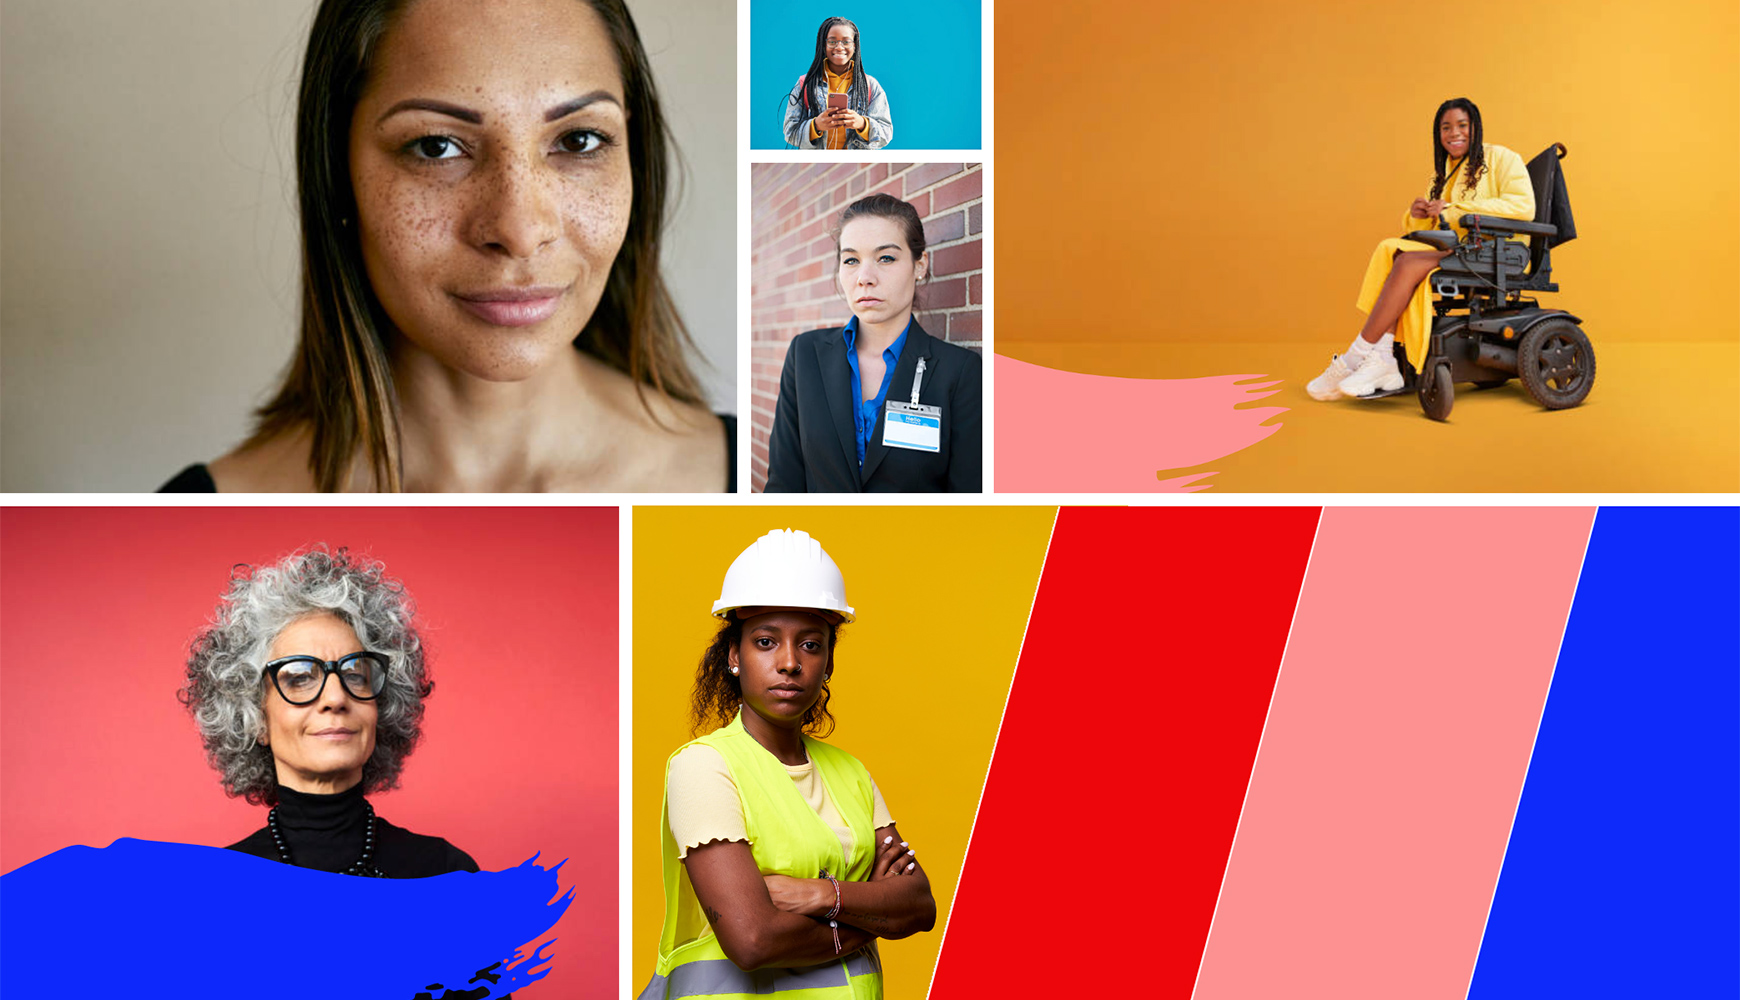 Composite Portraiture Mood Board depicting women from diverse backgrounds representing the retail, hospitality and manufacturing industries.